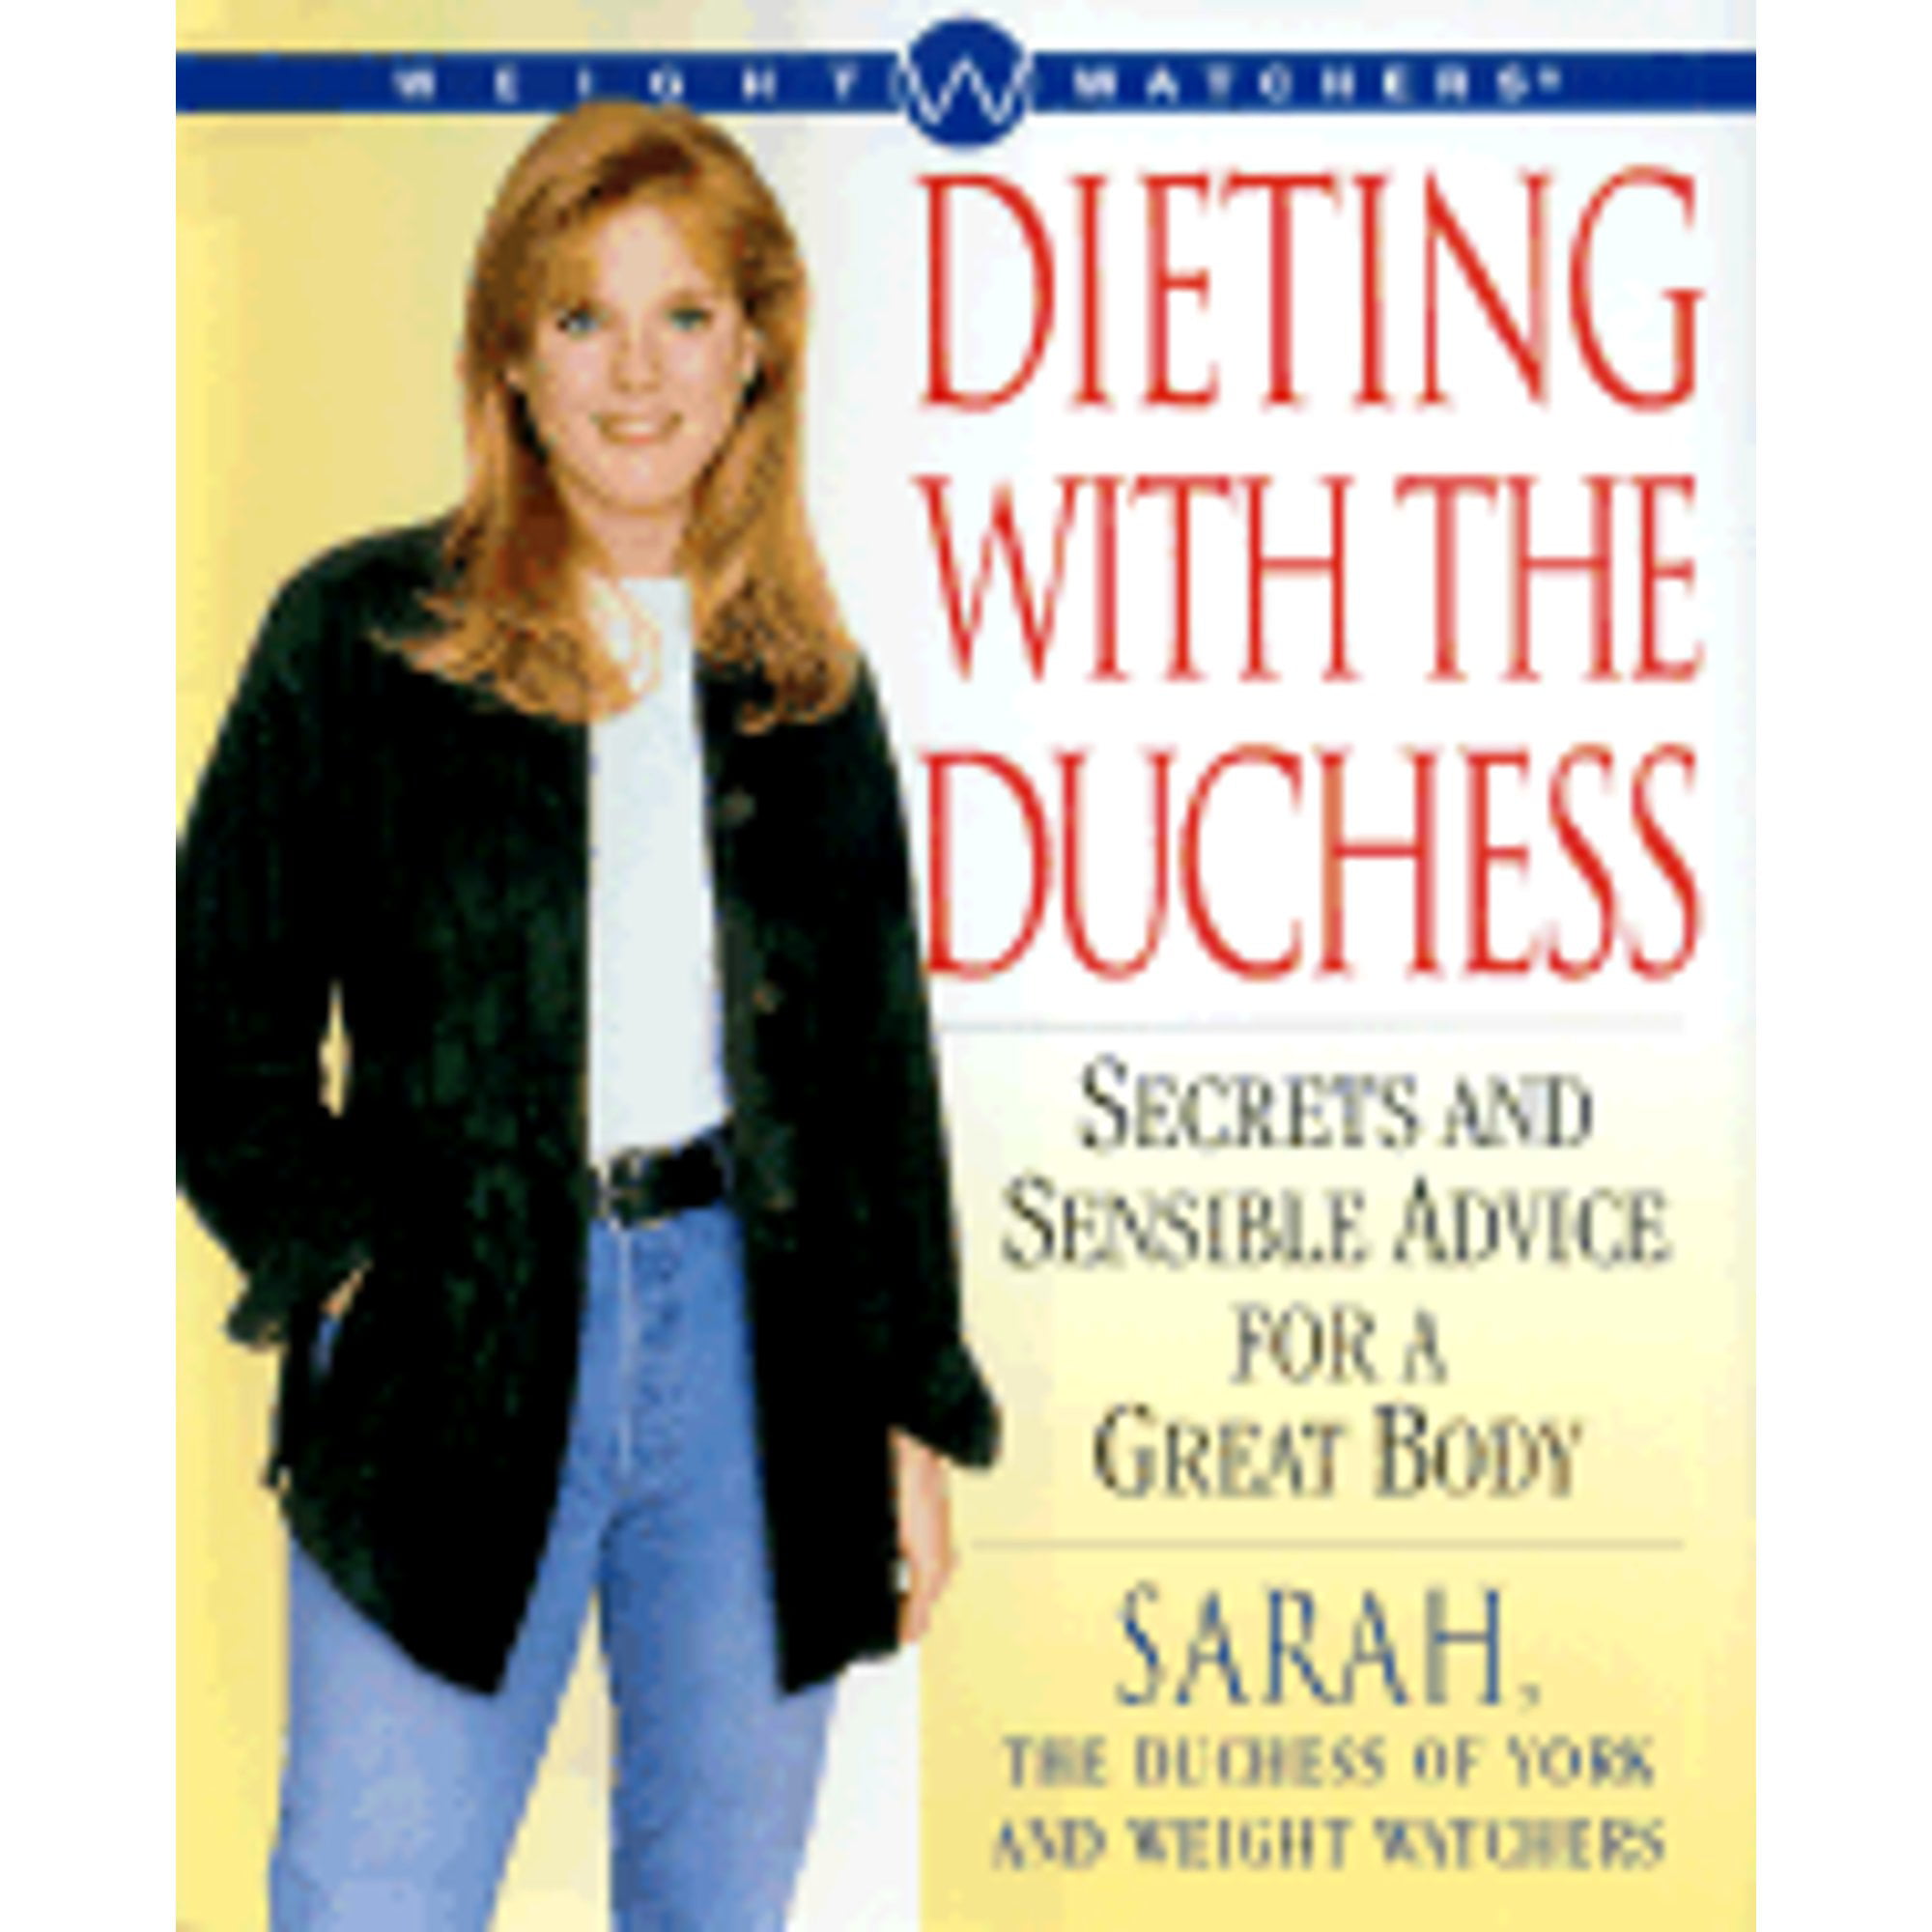 Pre-Owned Dieting with the Duchess: Secrets and Sensible Advice for a Great Body (Pre-Owned Hardcover 9780684857459) by The Duchess of York Sarah, Weight Watchers, Sarah Ferguson